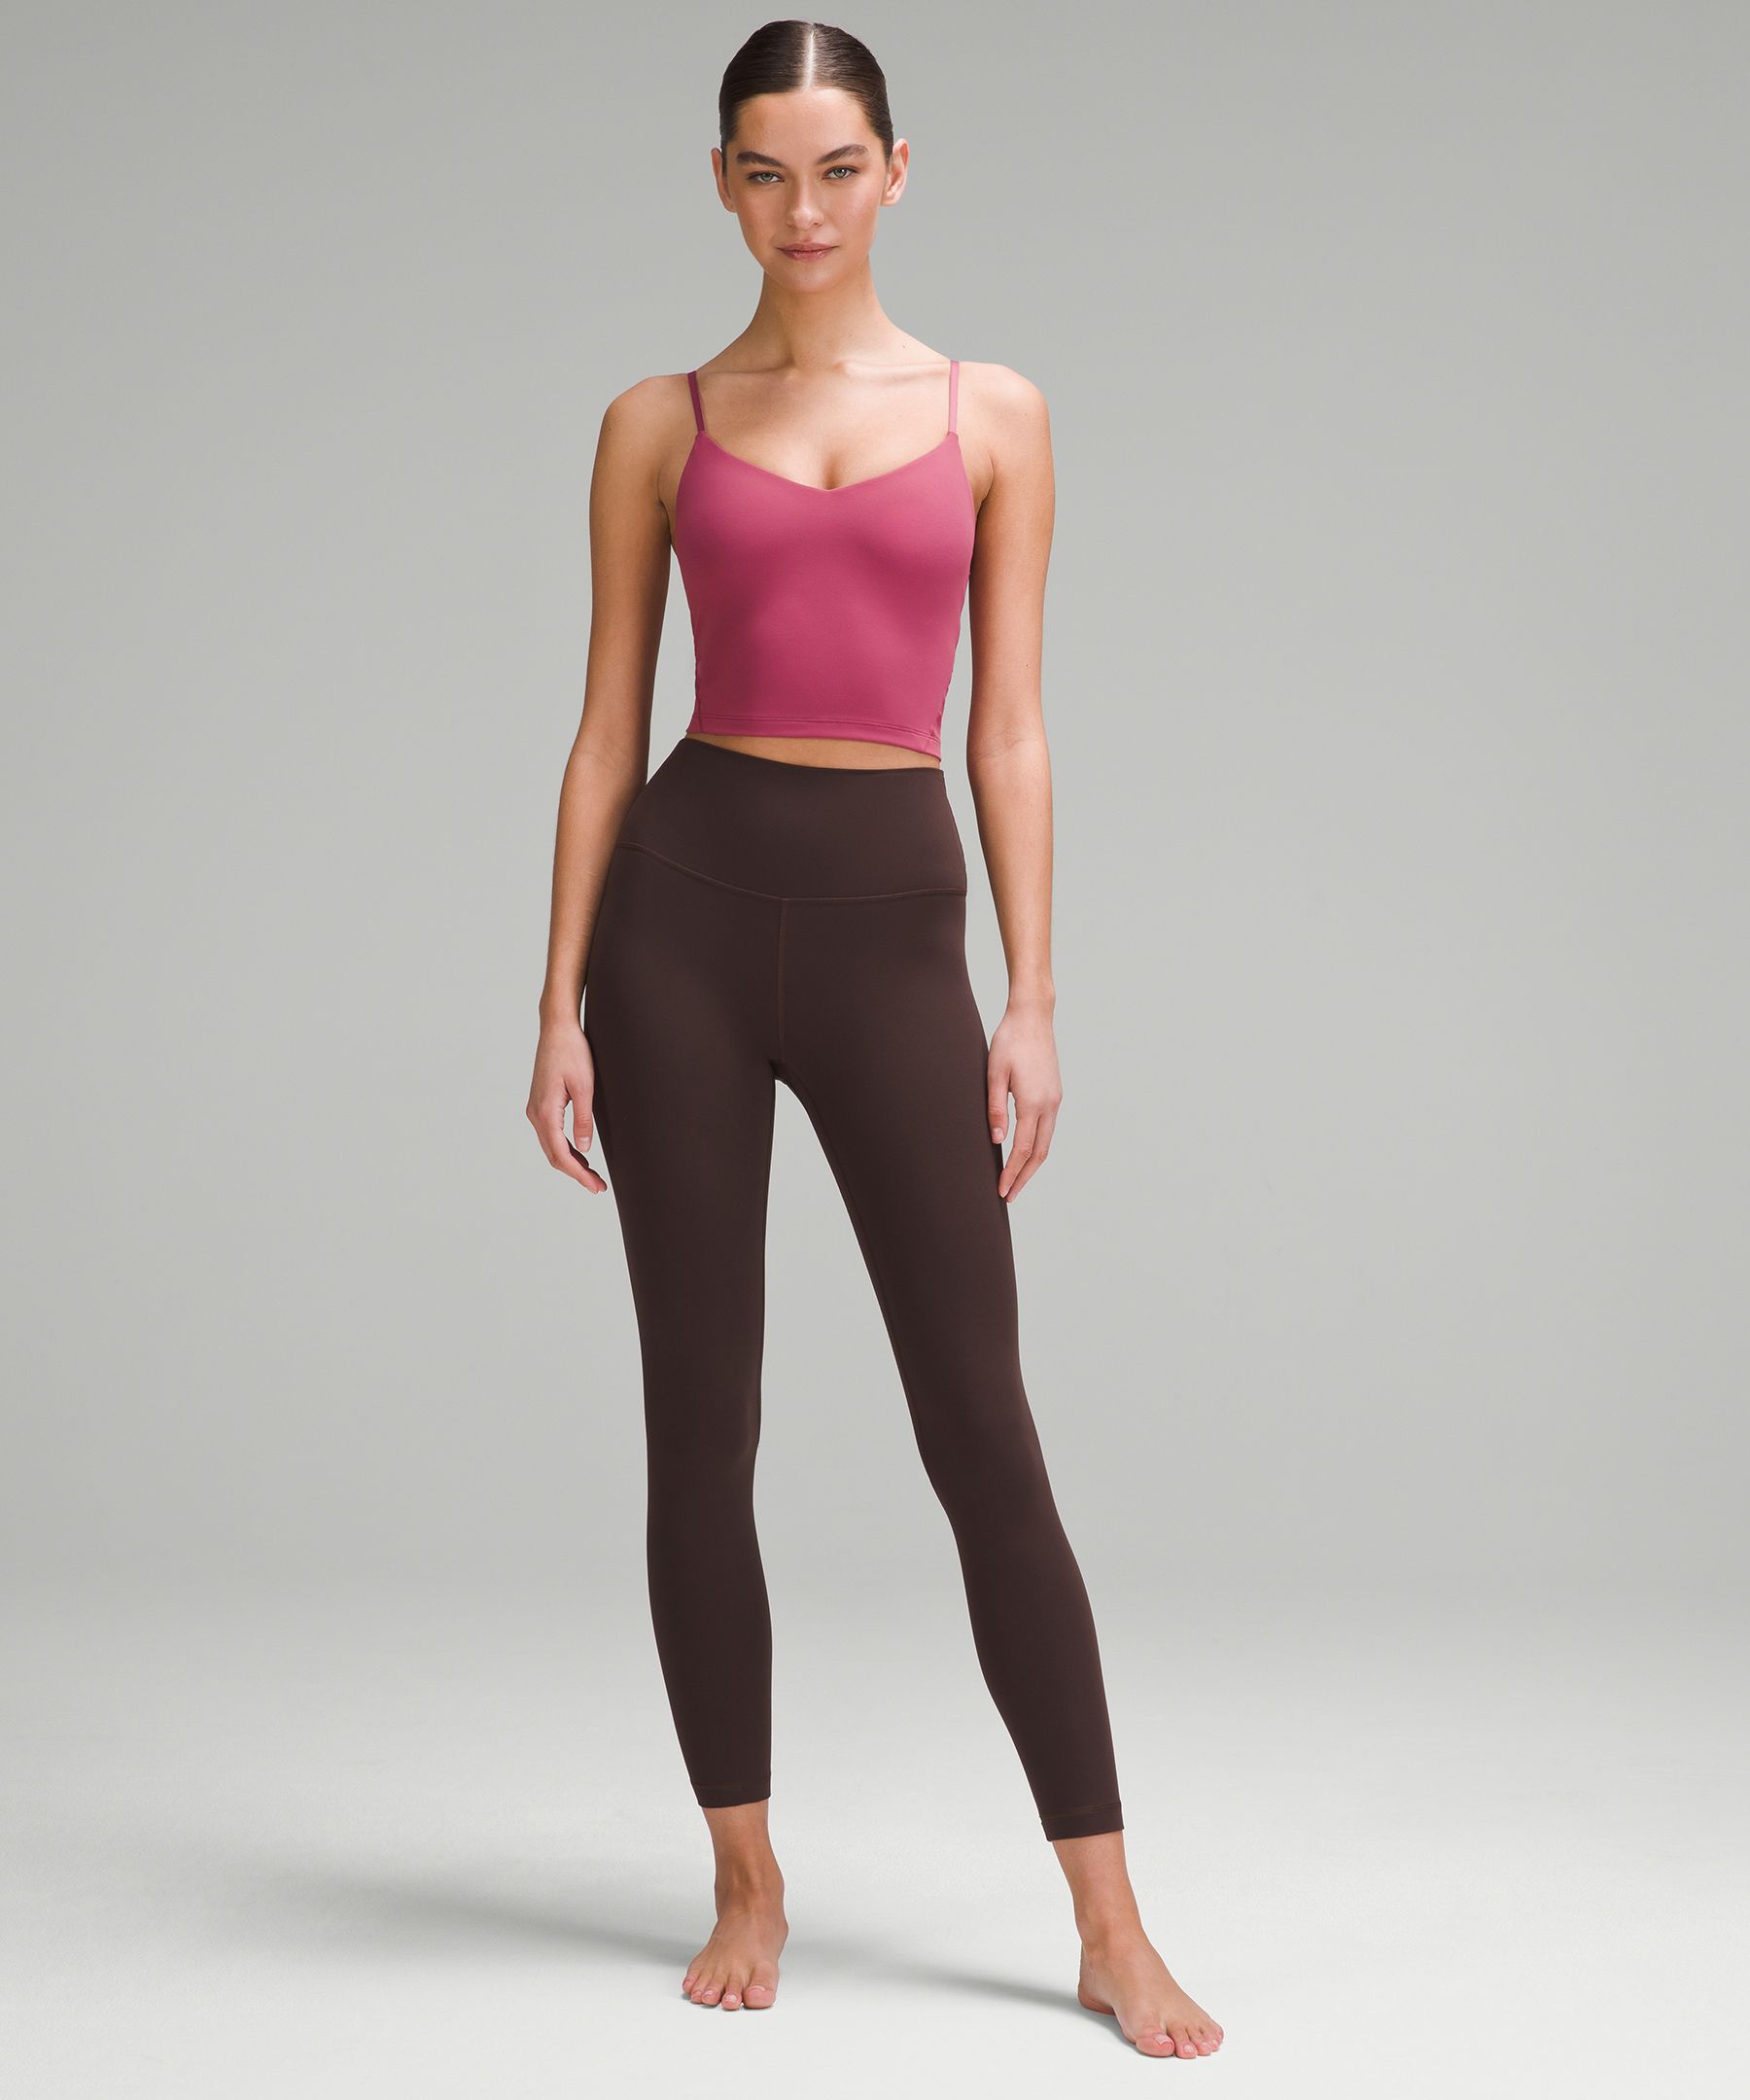 Lu Yoga Studio Pants For Women Quickly Dry, Ll Bean Drawstring Bag, Loose  Fit, Ideal For Yoga, Running, Gym, And Fitness From Hexiang2, $34.96